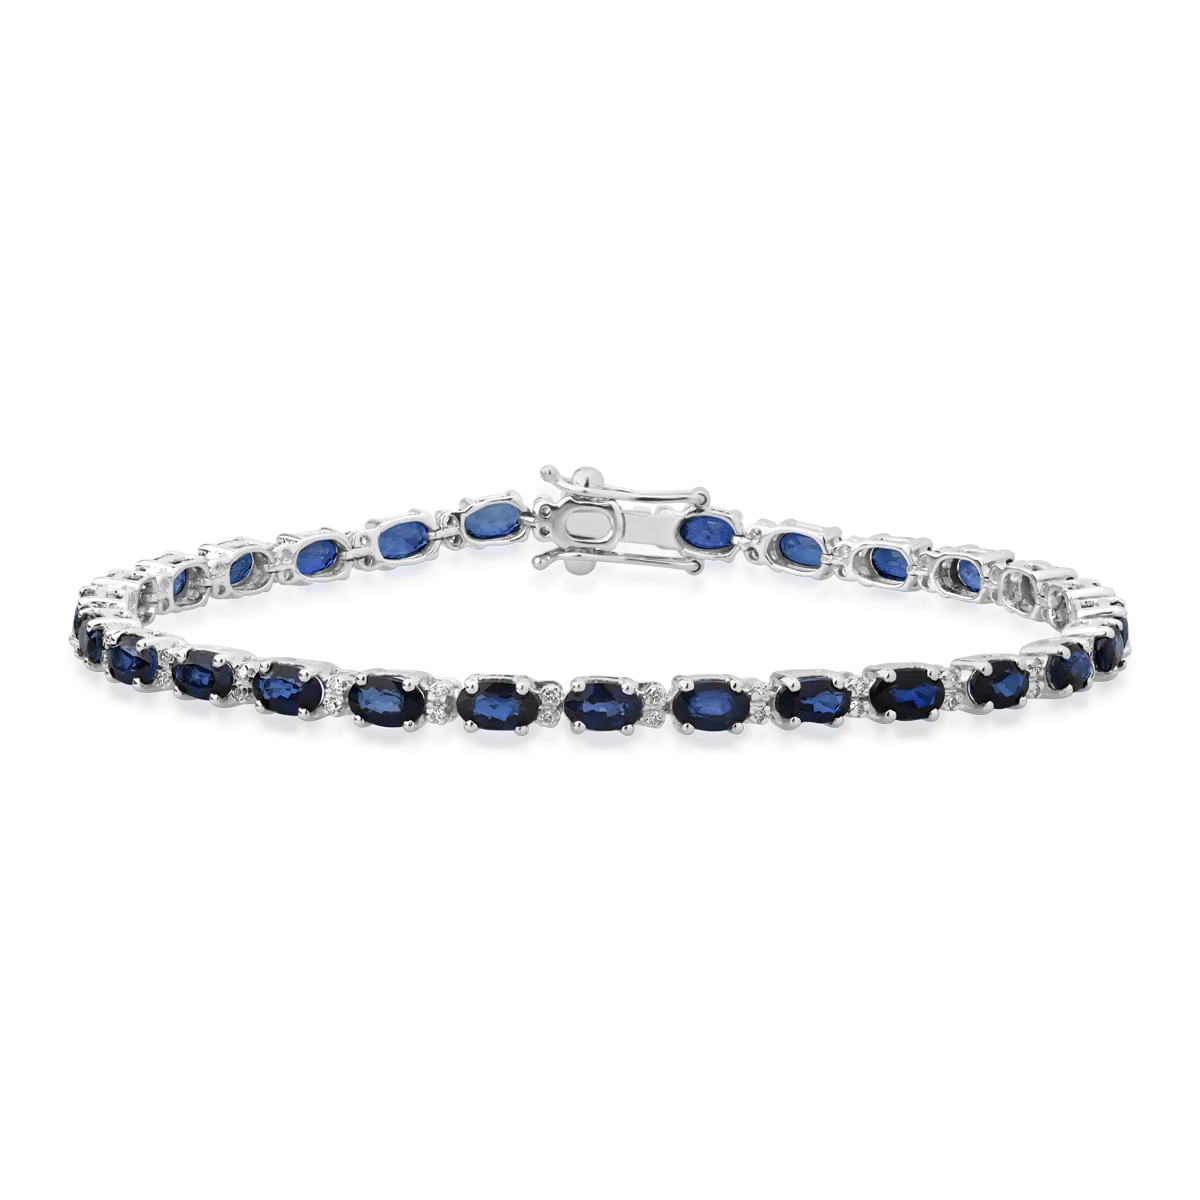 14K white gold tennis bracelet with 9.31ct treated sapphires and 0.28ct diamonds